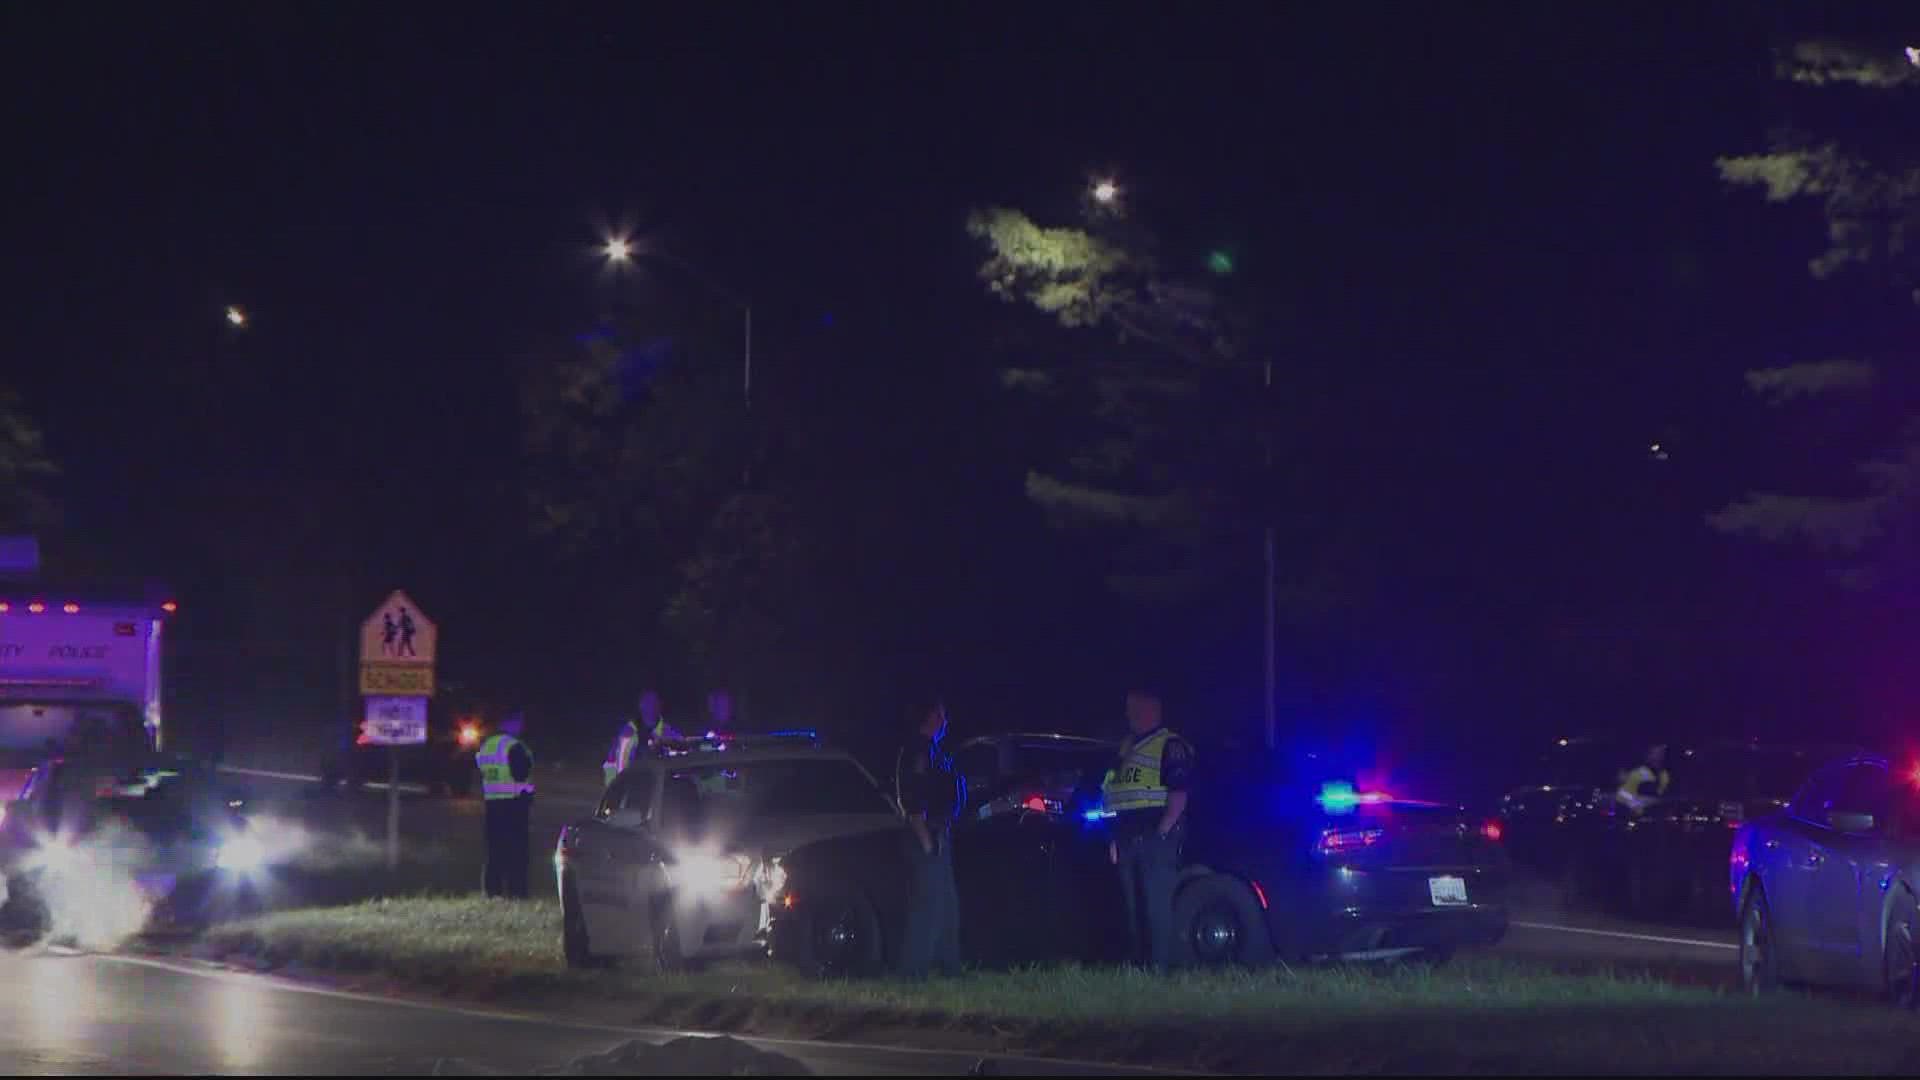 A man is dead after being hit by a vehicle in Montgomery County, Saturday night, authorities said.